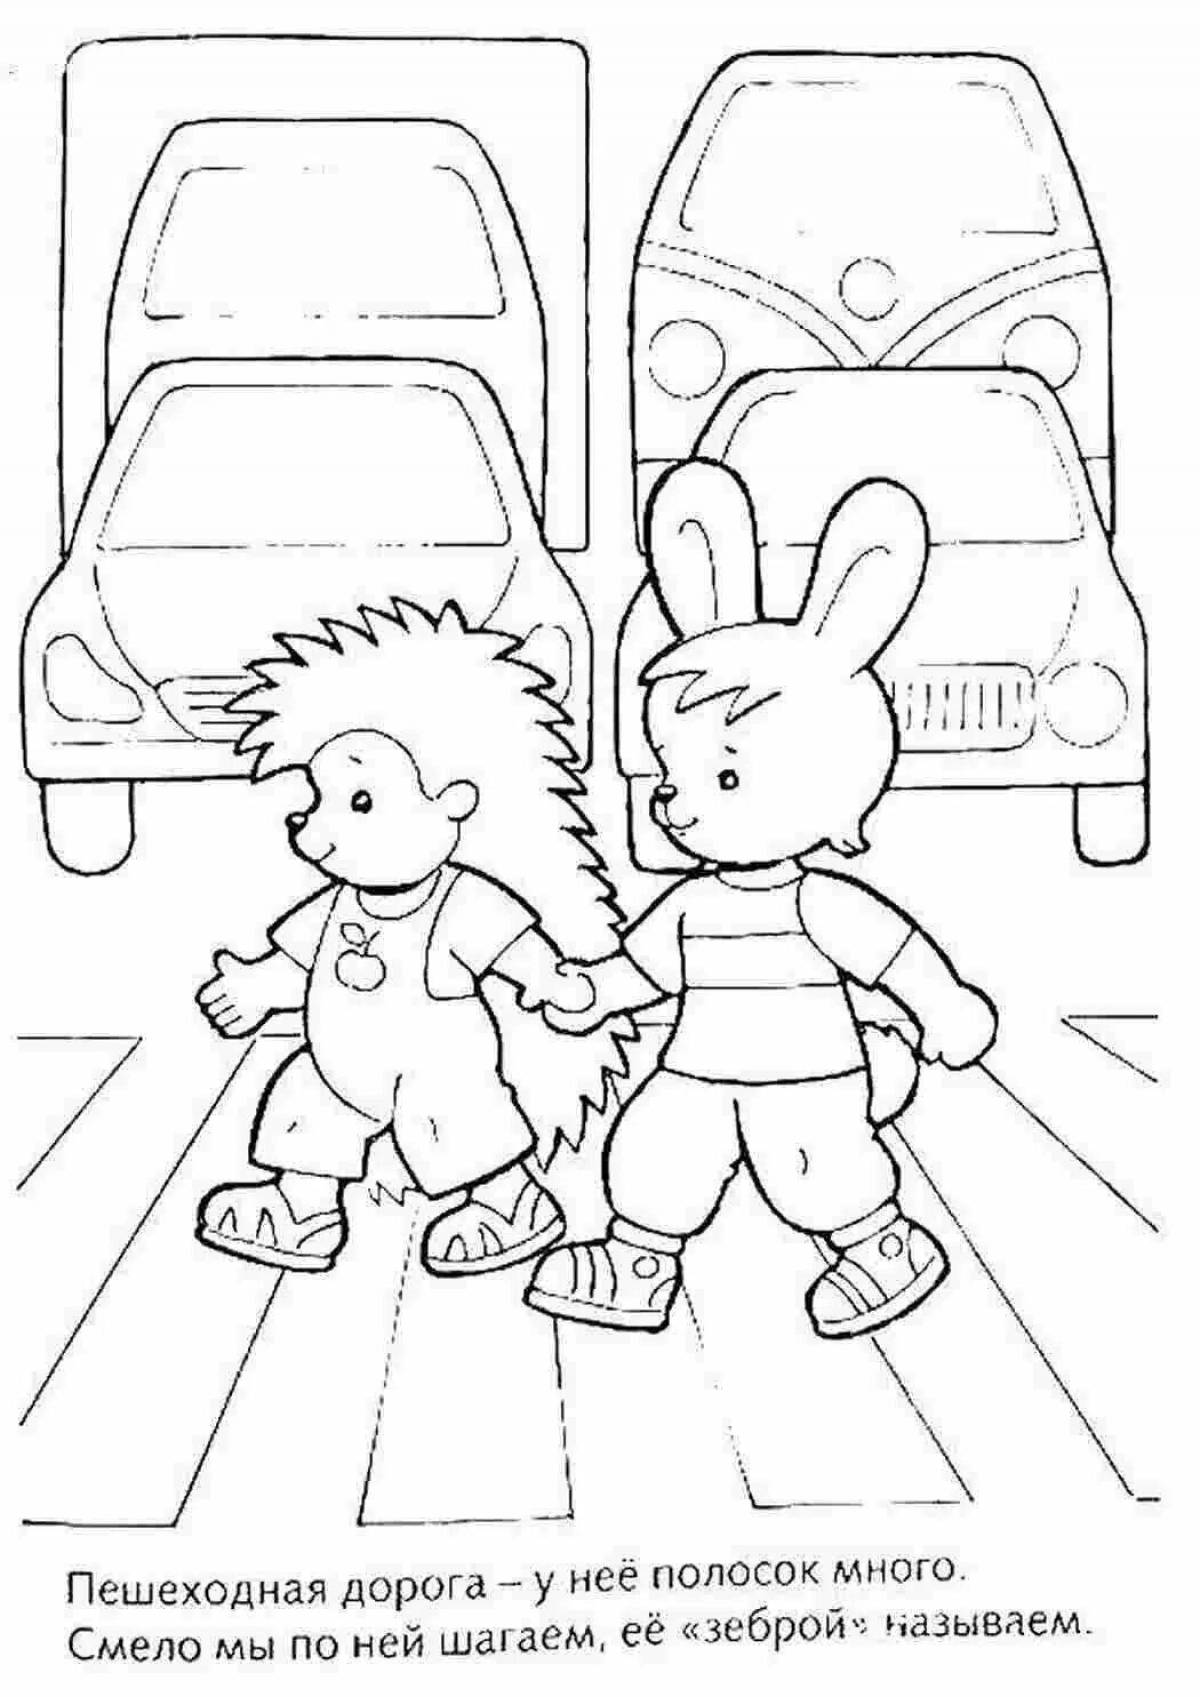 For children according to traffic rules for elementary school #7